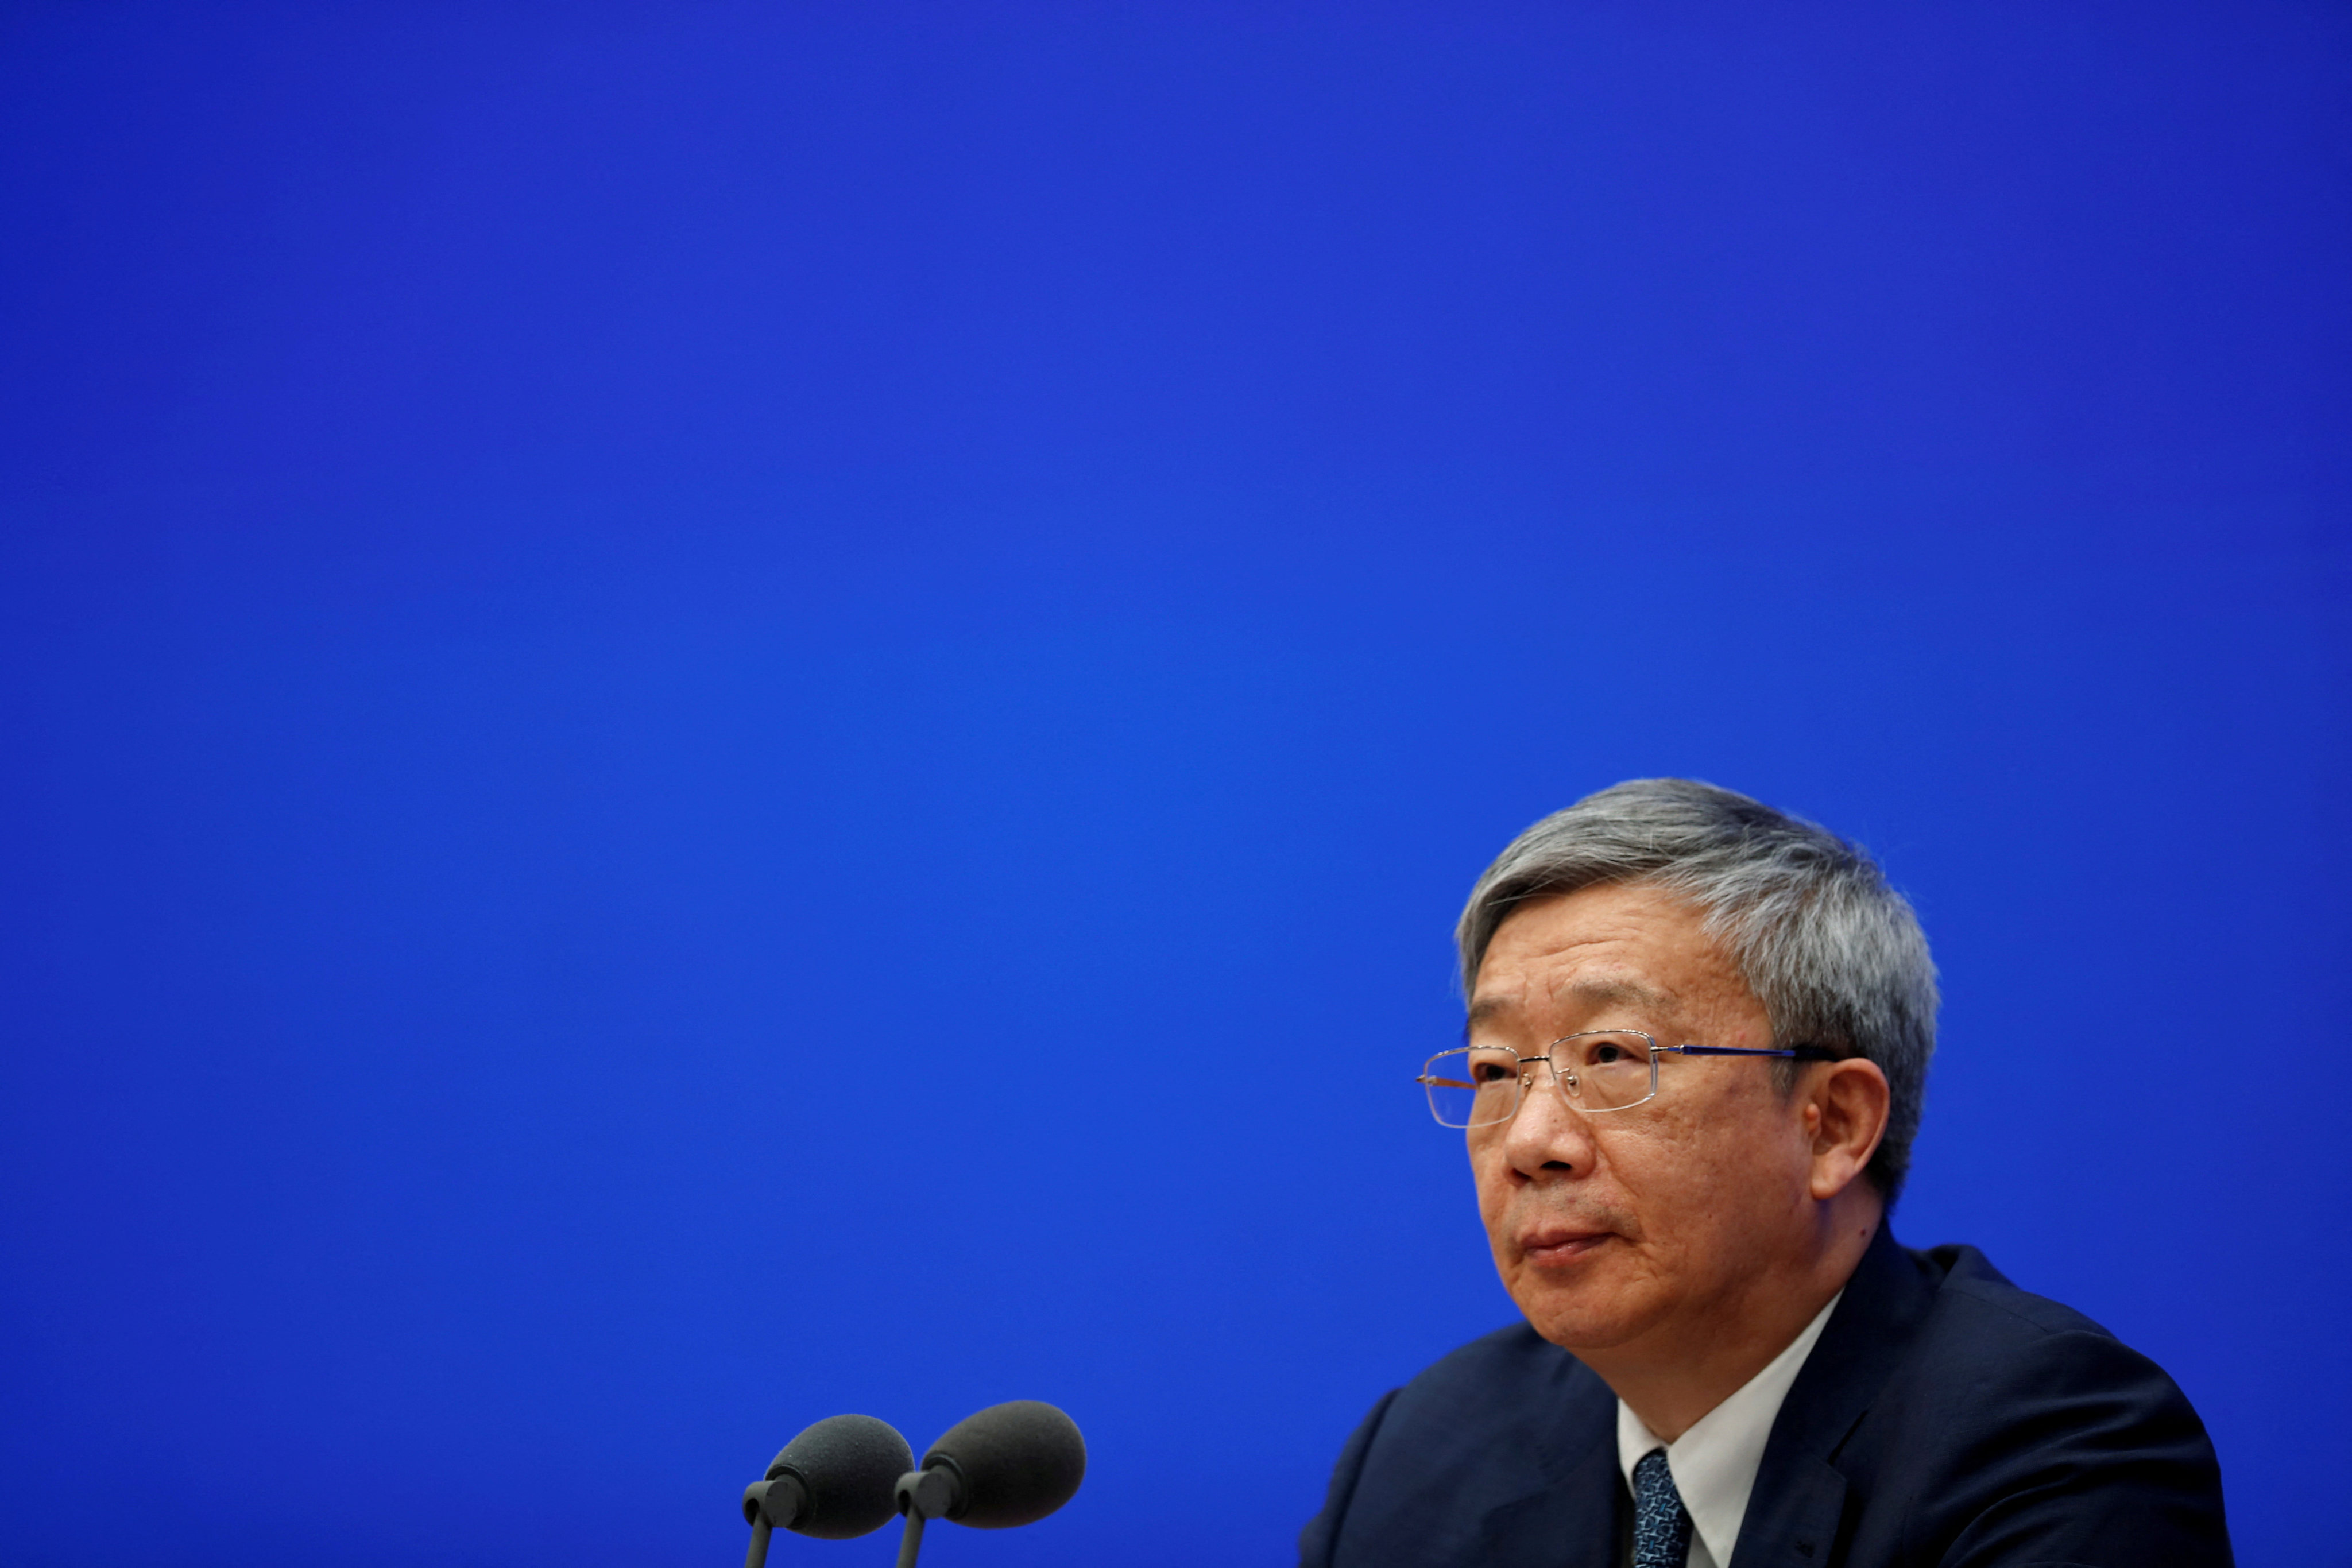 People’s Bank of China  Governor Yi Gang attended a meeting of finance ministers in Washington on Friday. Photo: Reuters